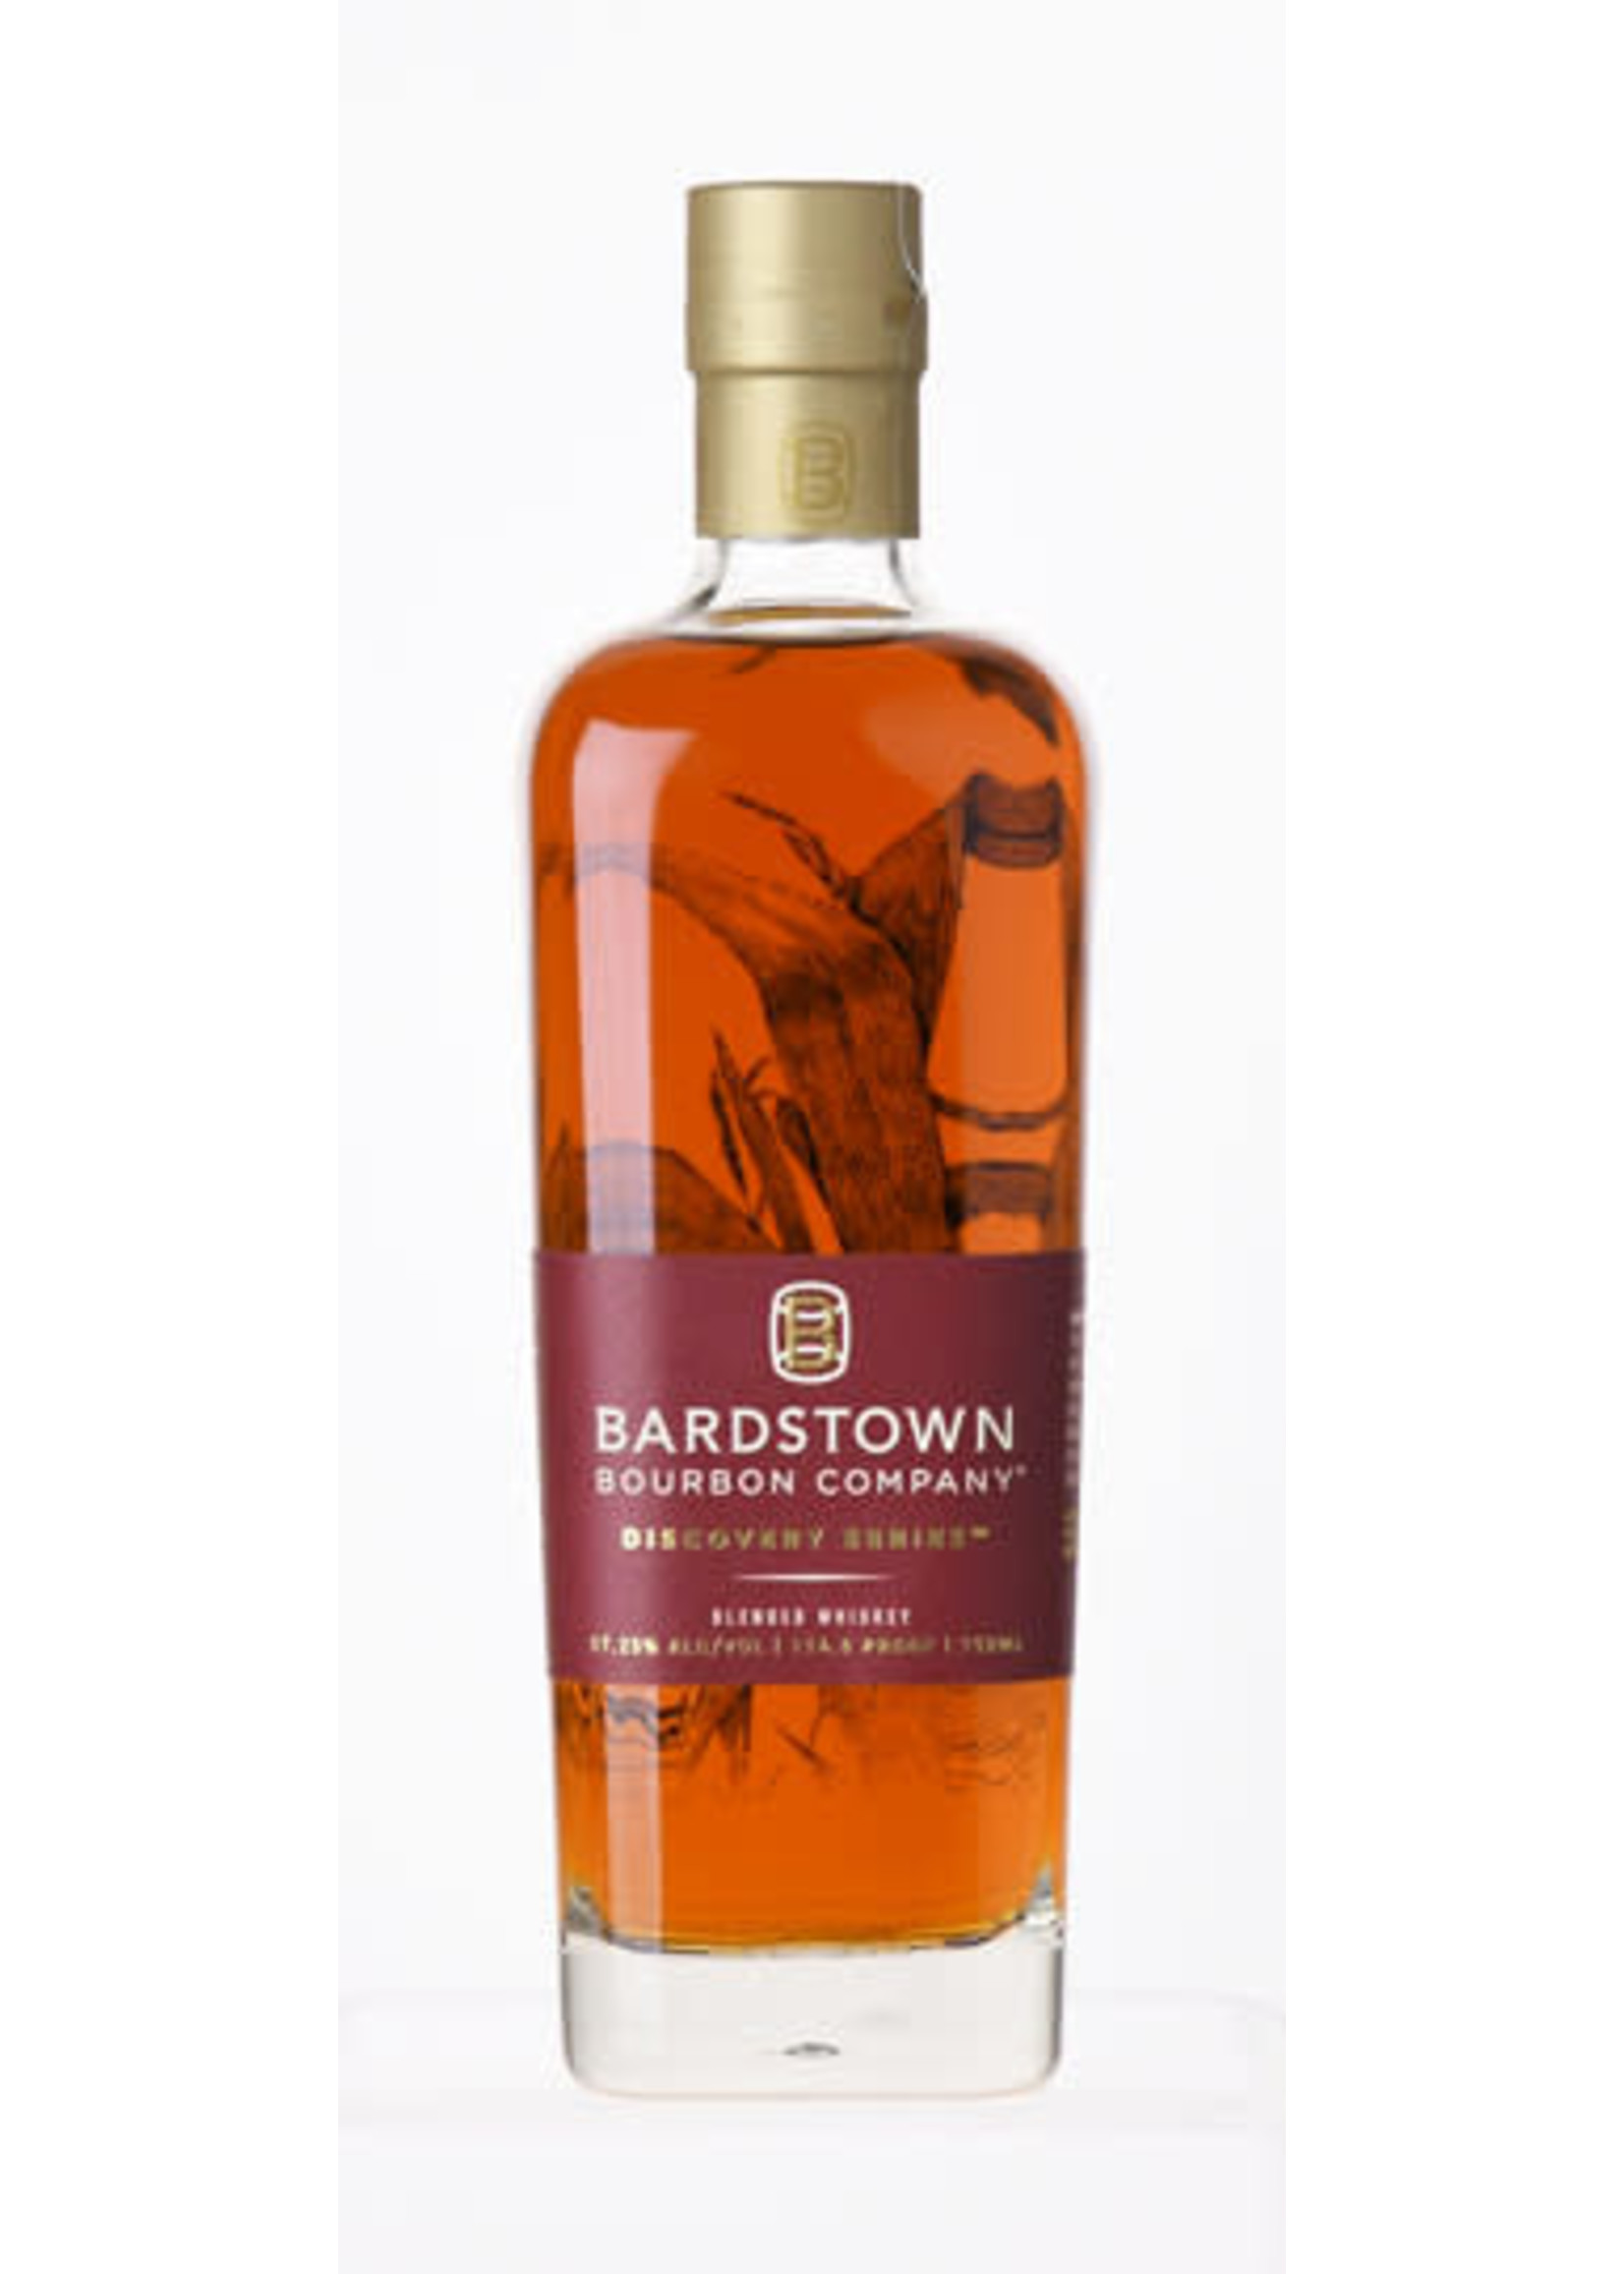 Bardstown Bourbon Company Bardstown / Discovery Series #7 Cask Strength Blend Of Straight Bourbon Whiskies / 750mL